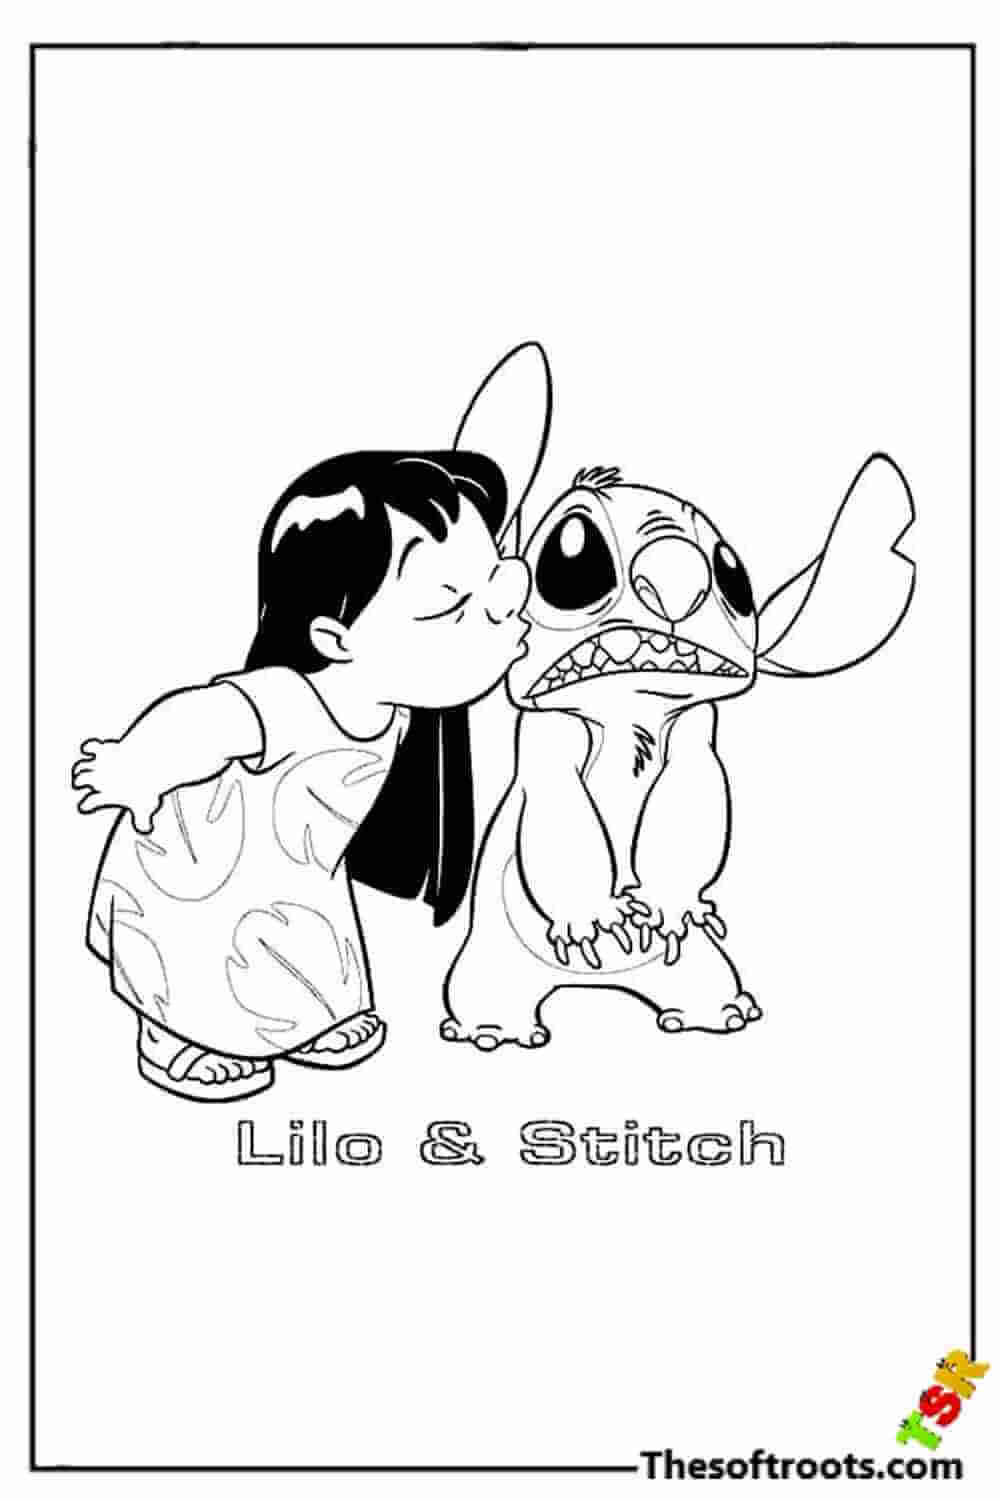 Lilo kiss Stitch coloring pages